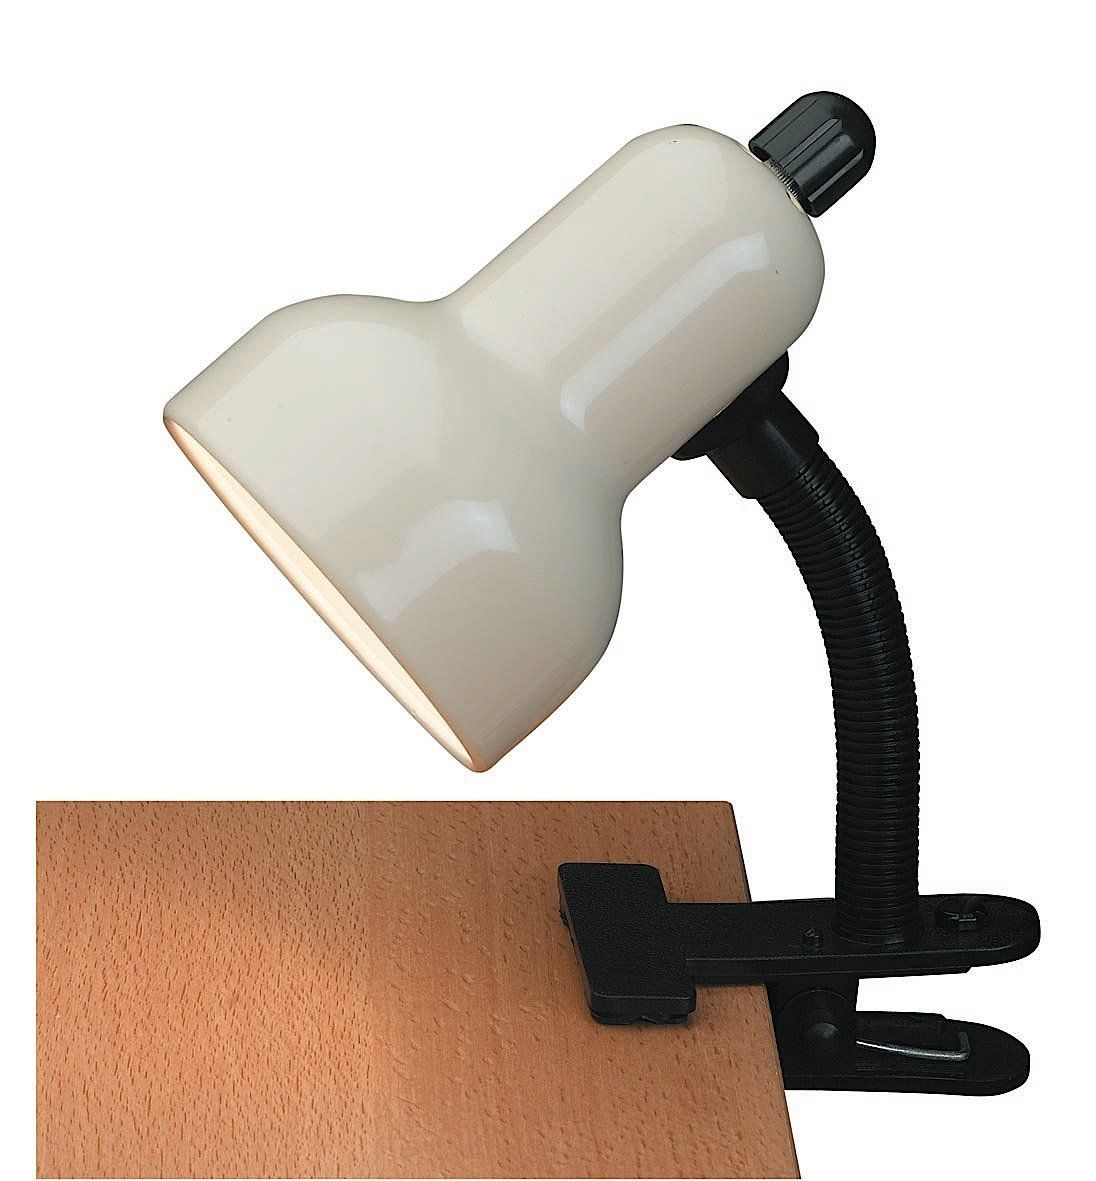 Lite Source LS-111RED Red Clamp On Lamp from the Clip-On